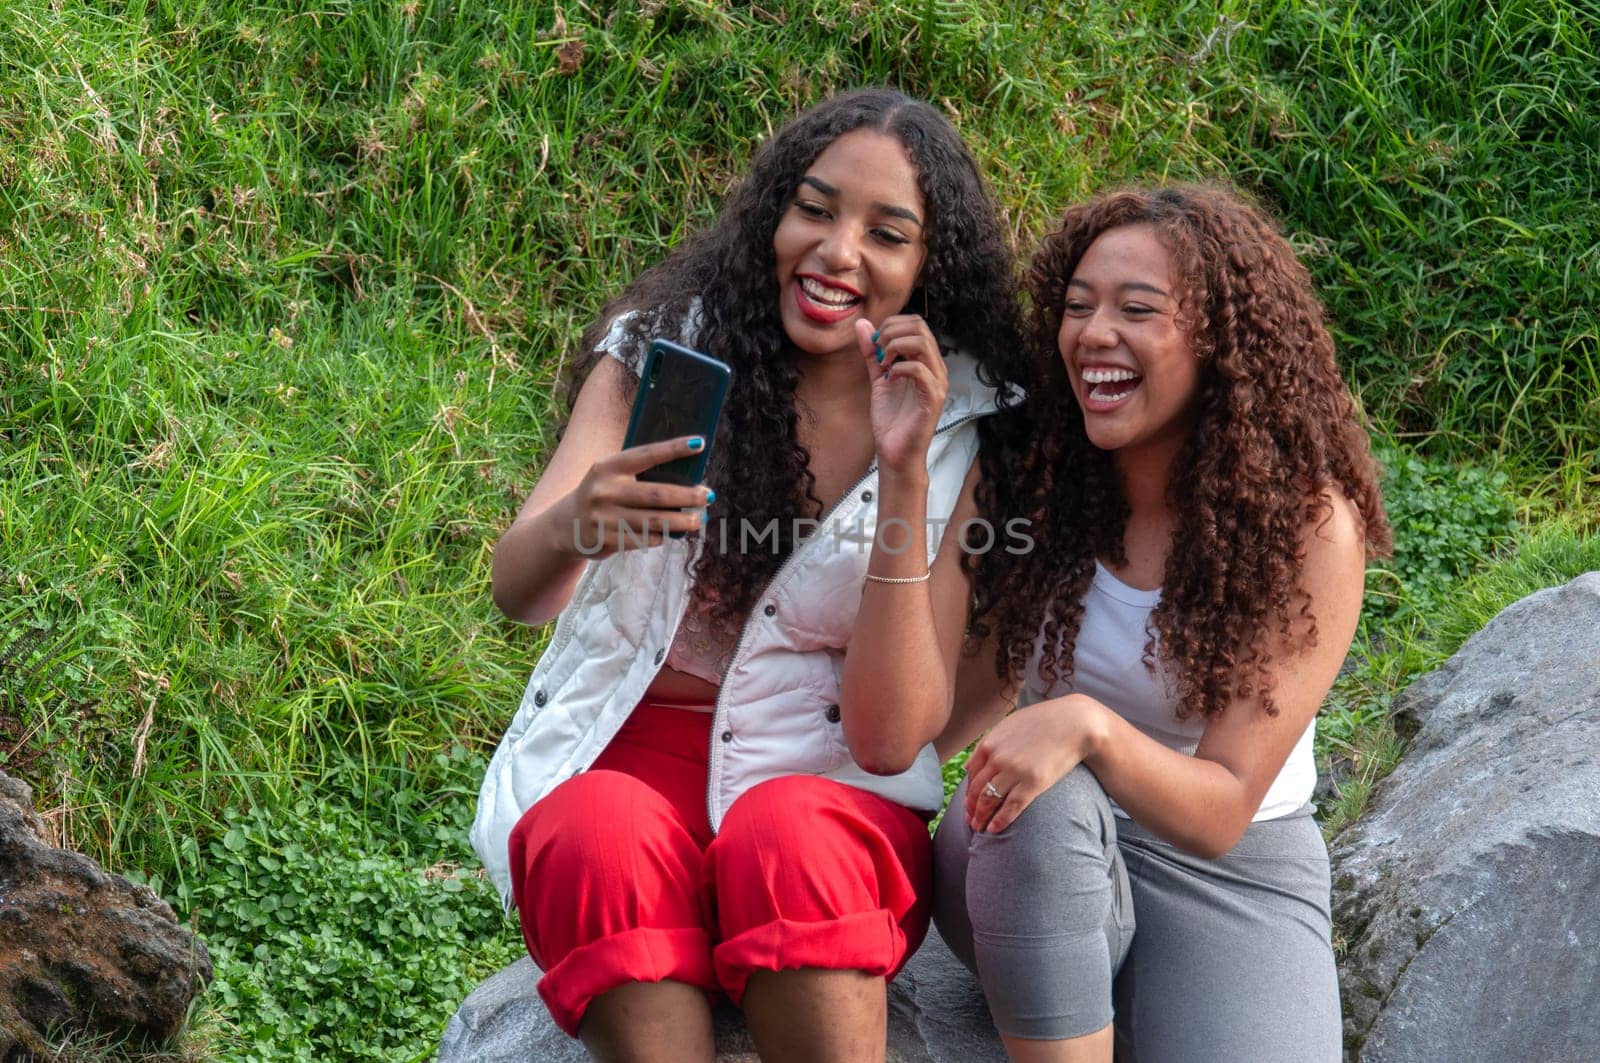 two beautiful women from latin america laughing in front of their cell phone cameras while creating content for their social networks. by Raulmartin